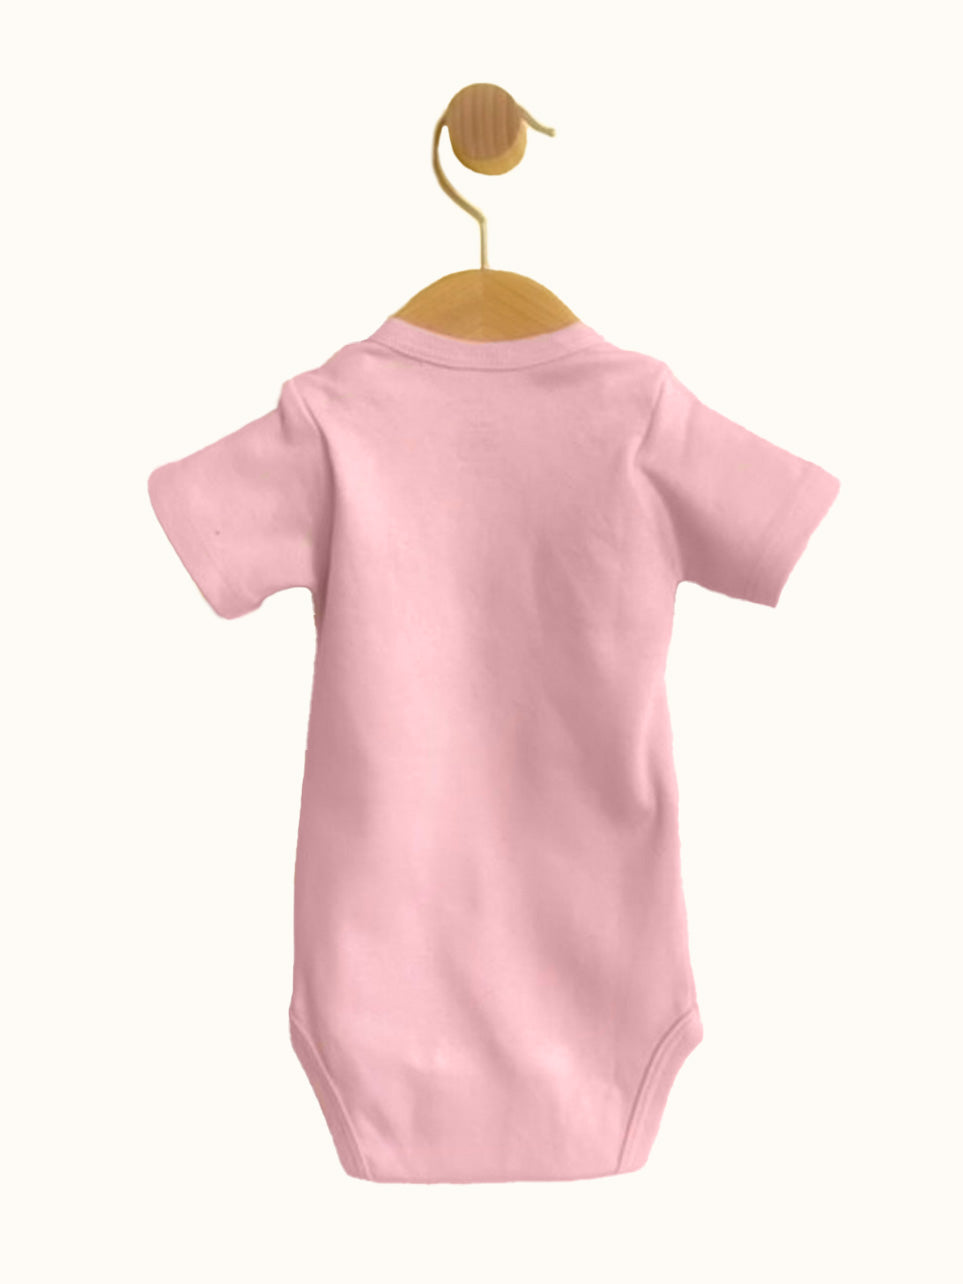 Back view of pink short sleeve Baby Bodysuit with pacifier strap and snap crotch